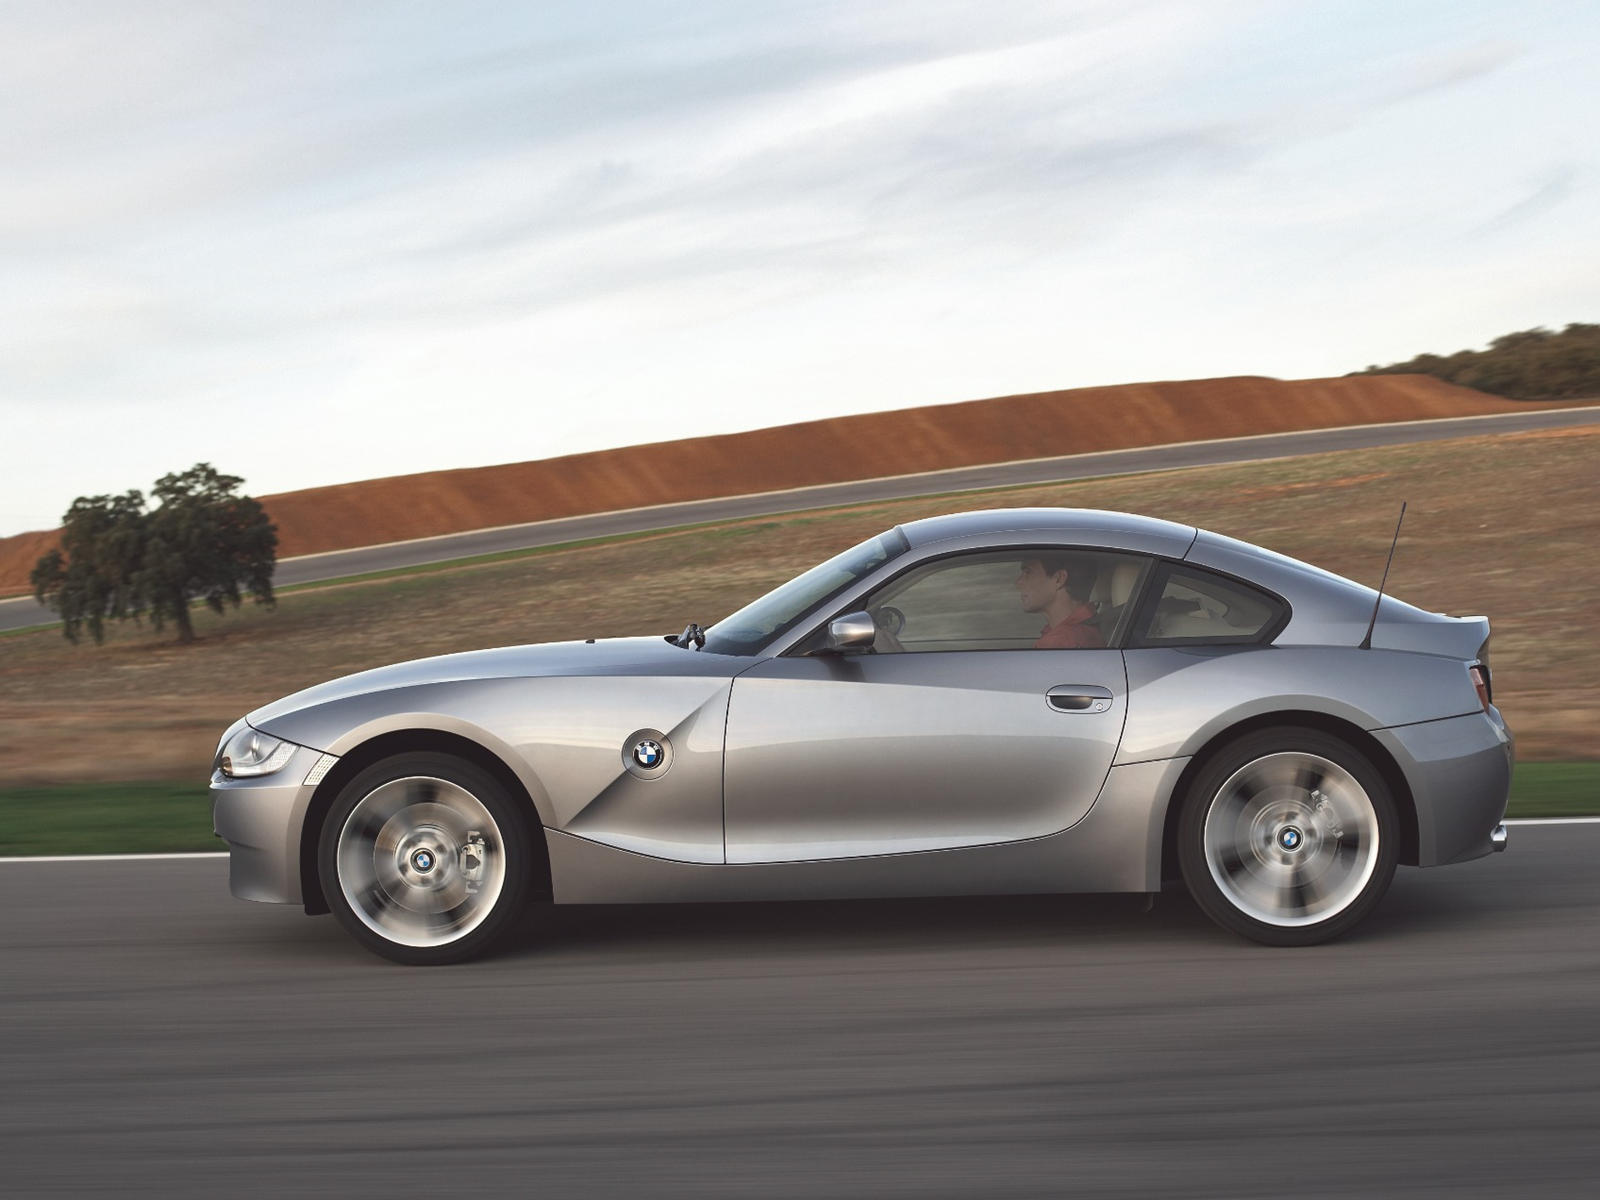 https://cdn.carbuzz.com/gallery-images/2008-bmw-z4-coupe-side-view-driving-carbuzz-457014-1600.jpg